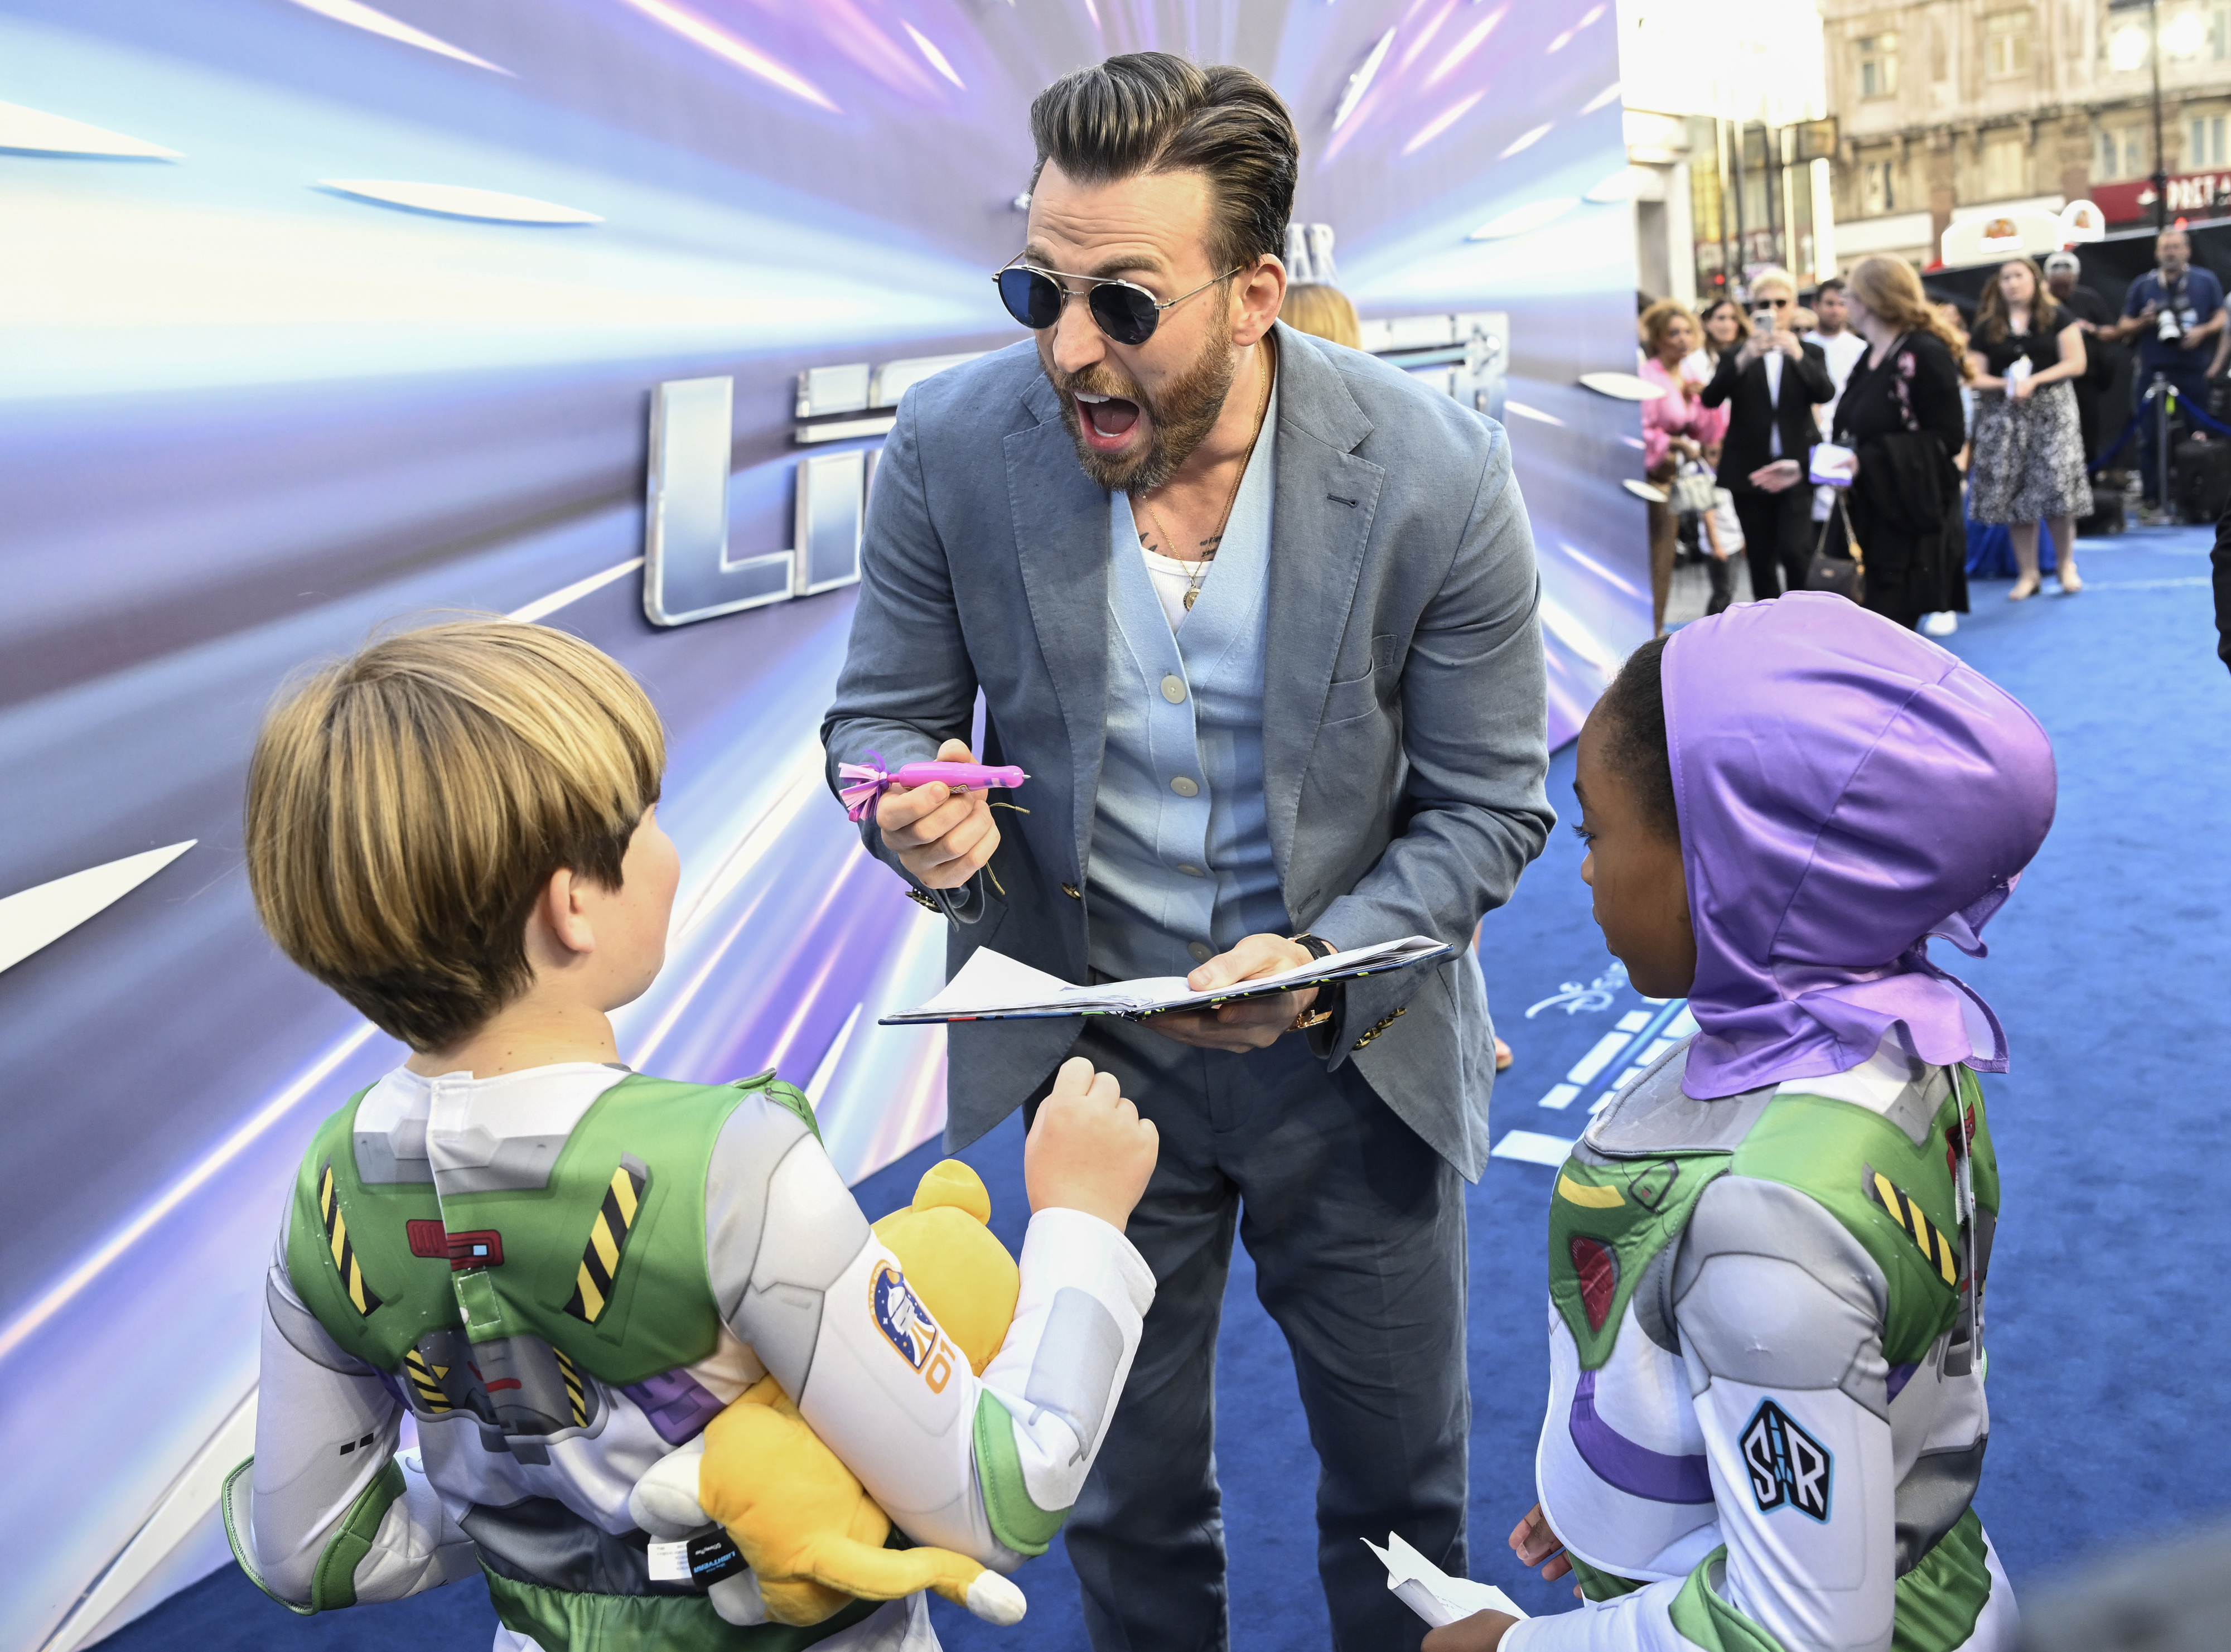 Chris Evans signing his autograph for two kids dressed like Buzz Lightyear at his movie premiere